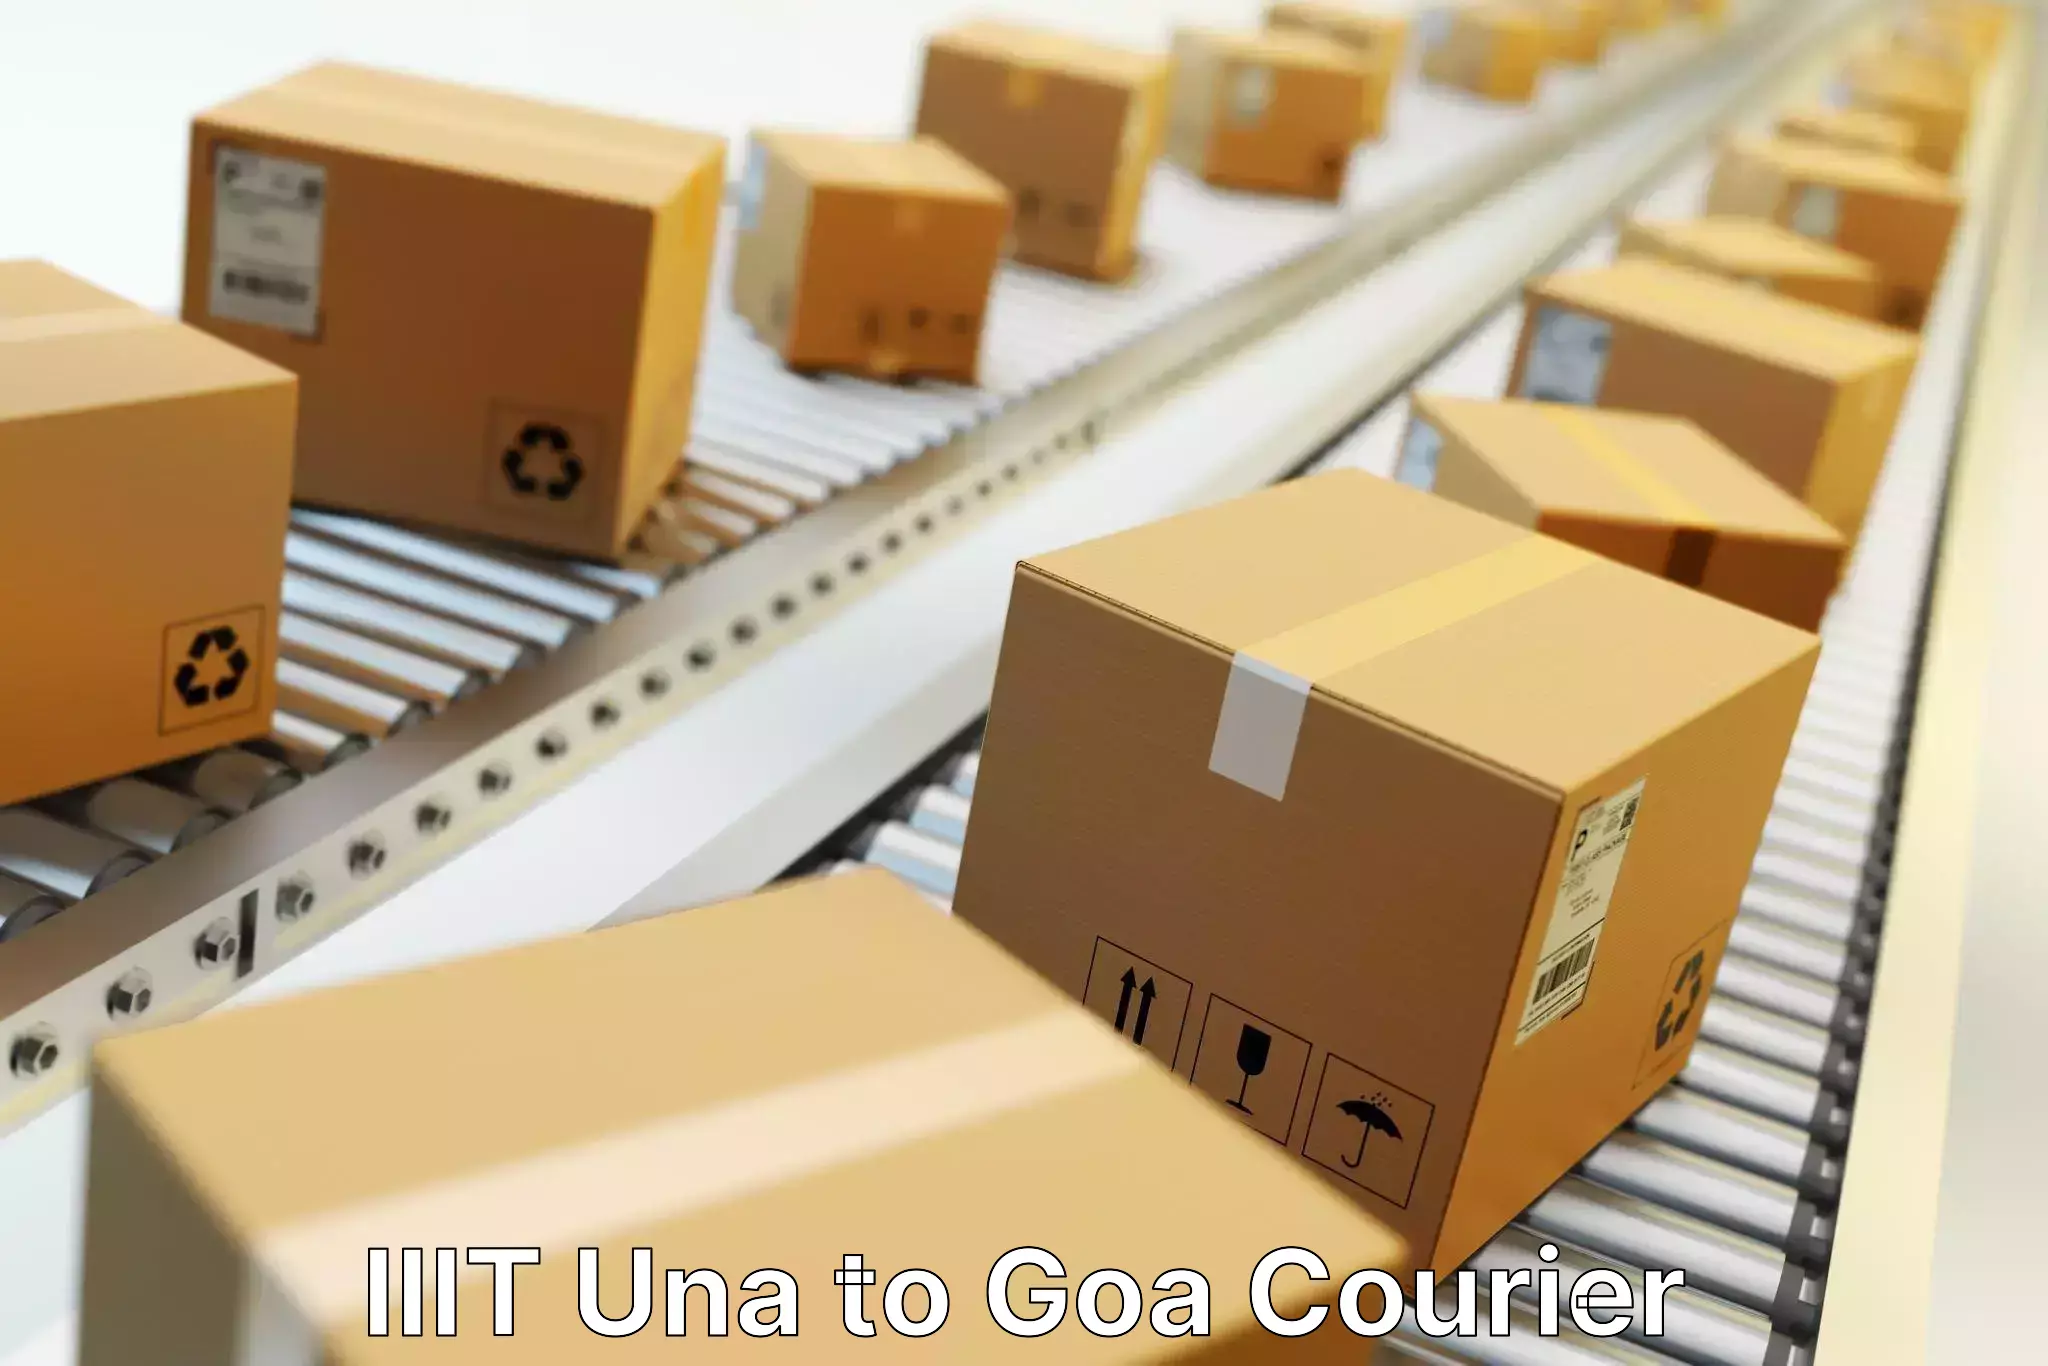 Automated parcel services IIIT Una to Goa